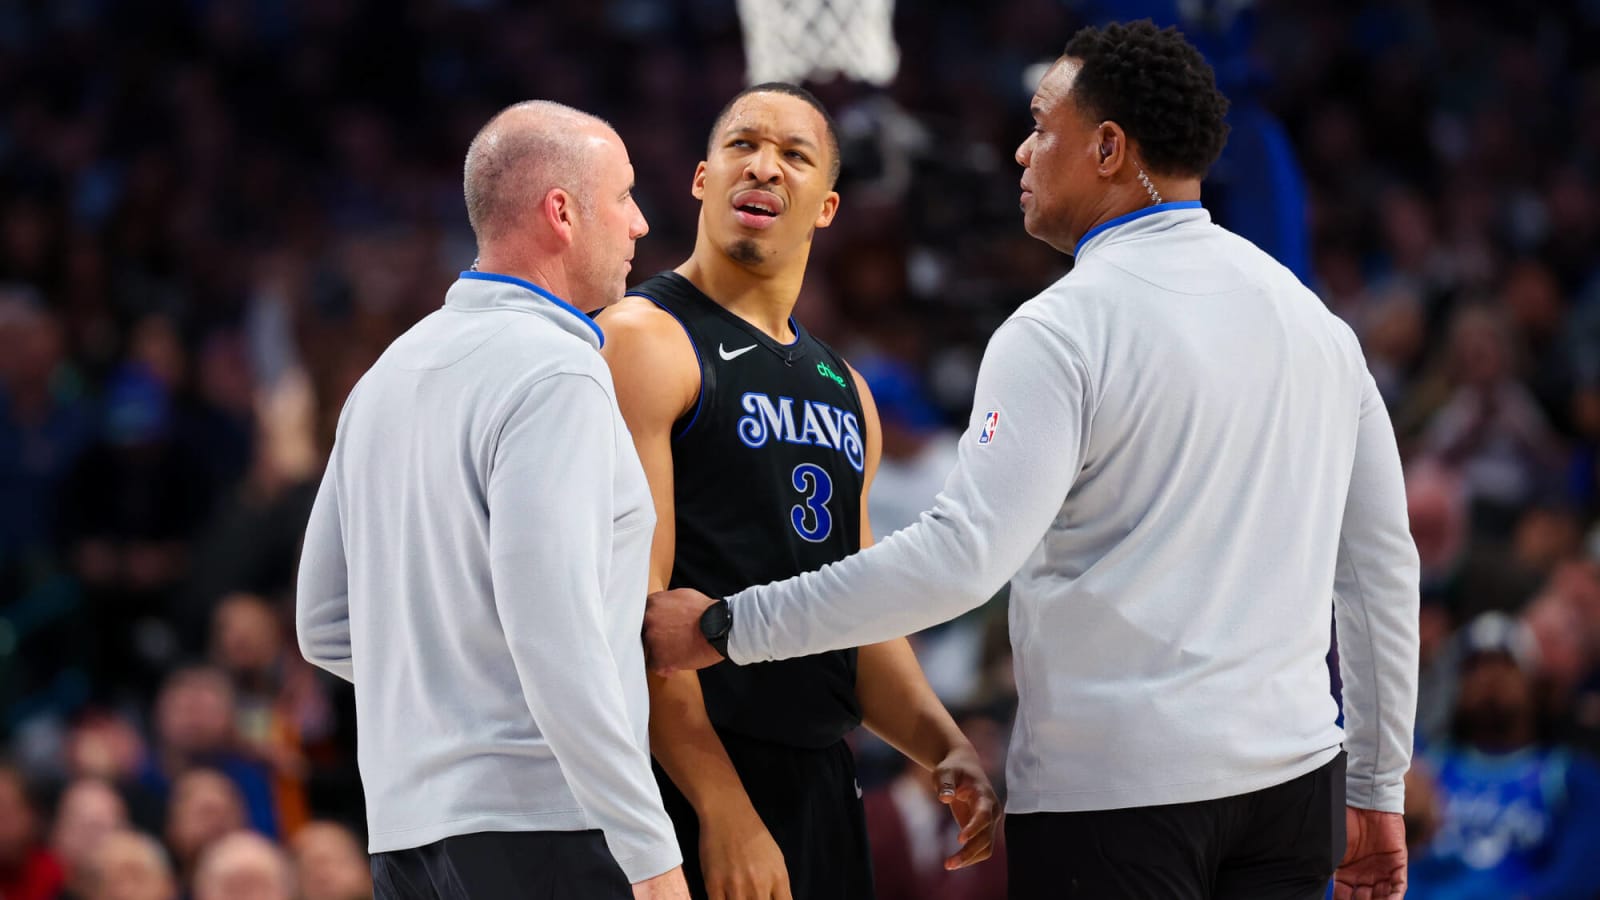 Former Vol Grant Williams ejected after on-court scuffle with NBA superstar